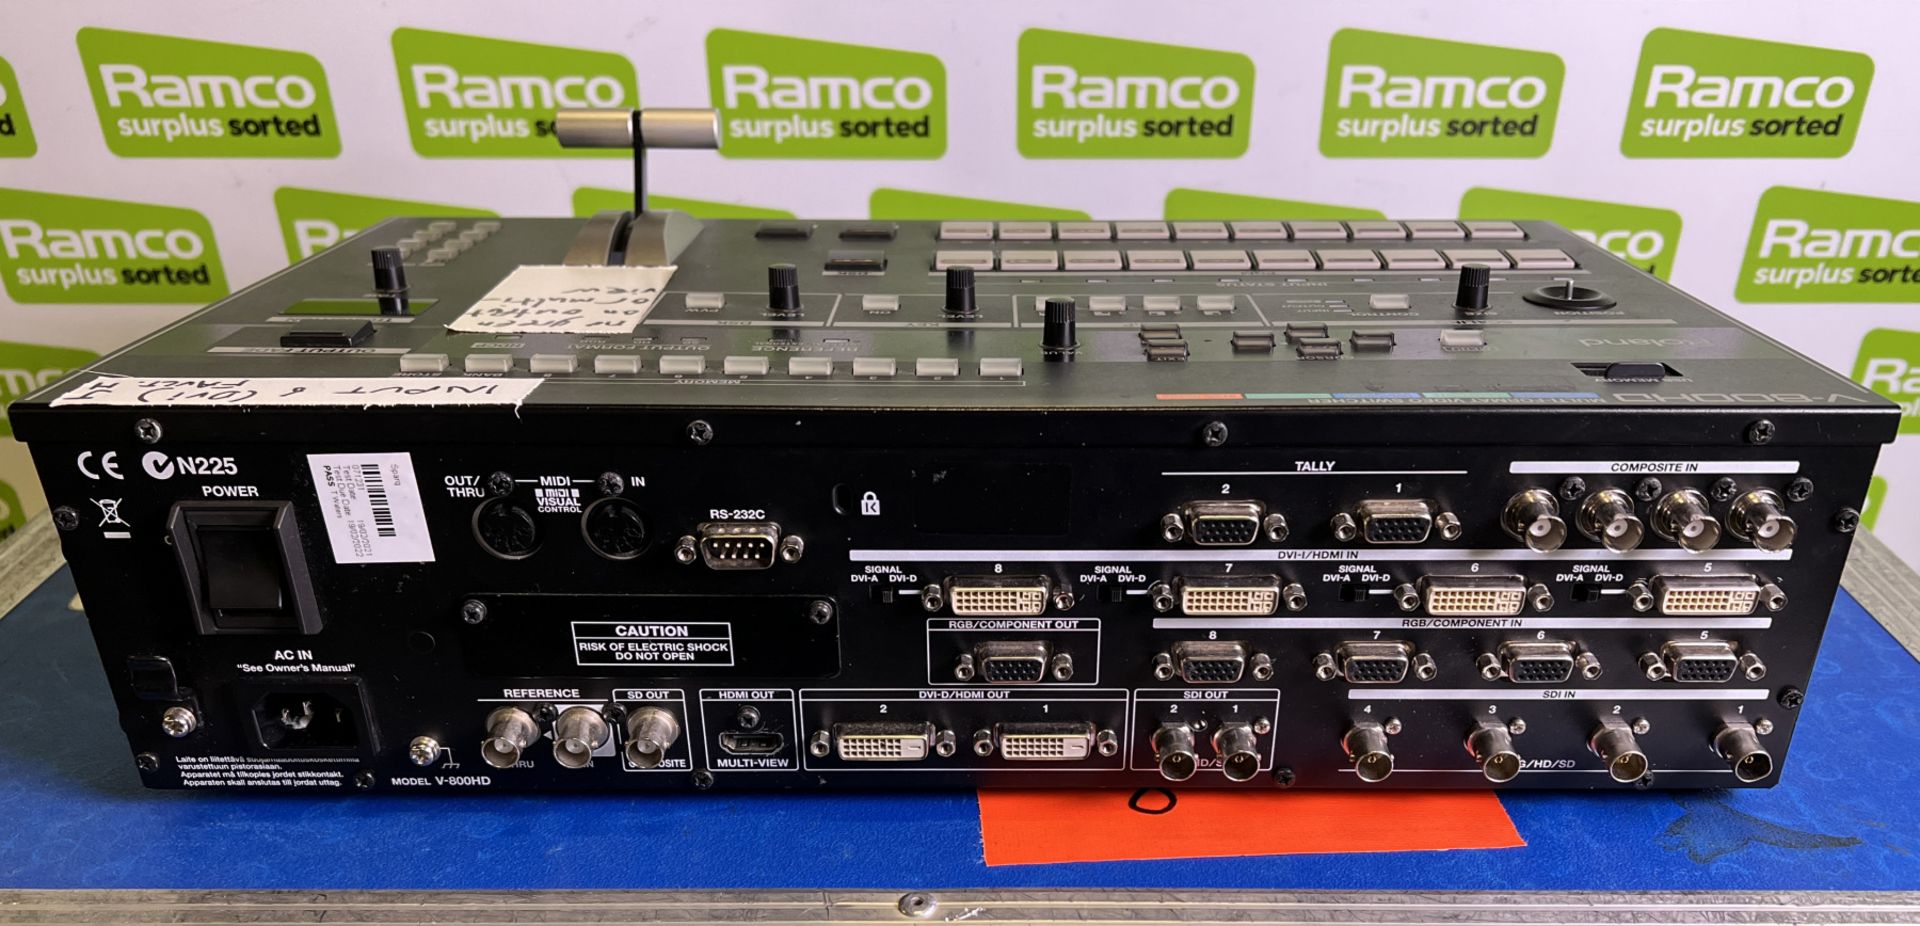 Roland V800HD vision mixer in flight case - case dimensions: L 690 x W 370 x H 230mm - FAULTY OUTPUT - Image 6 of 10